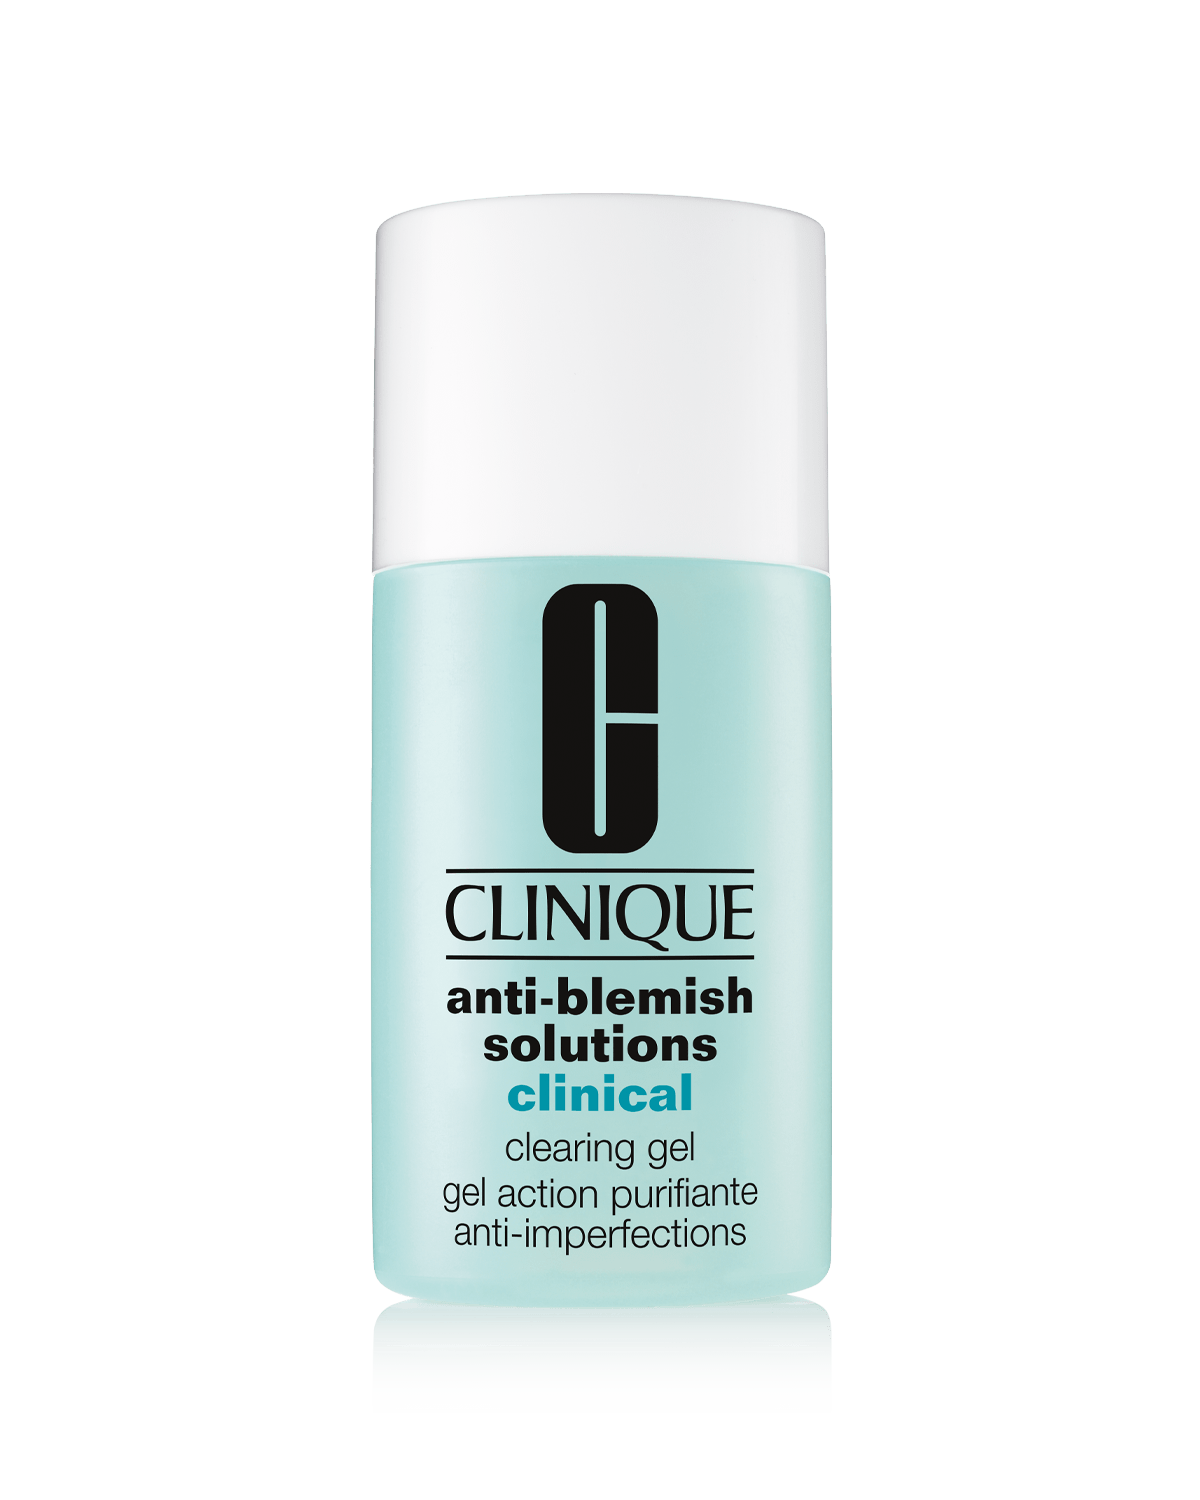 Anti- Blemish Solutions Clinical Clearing Gel